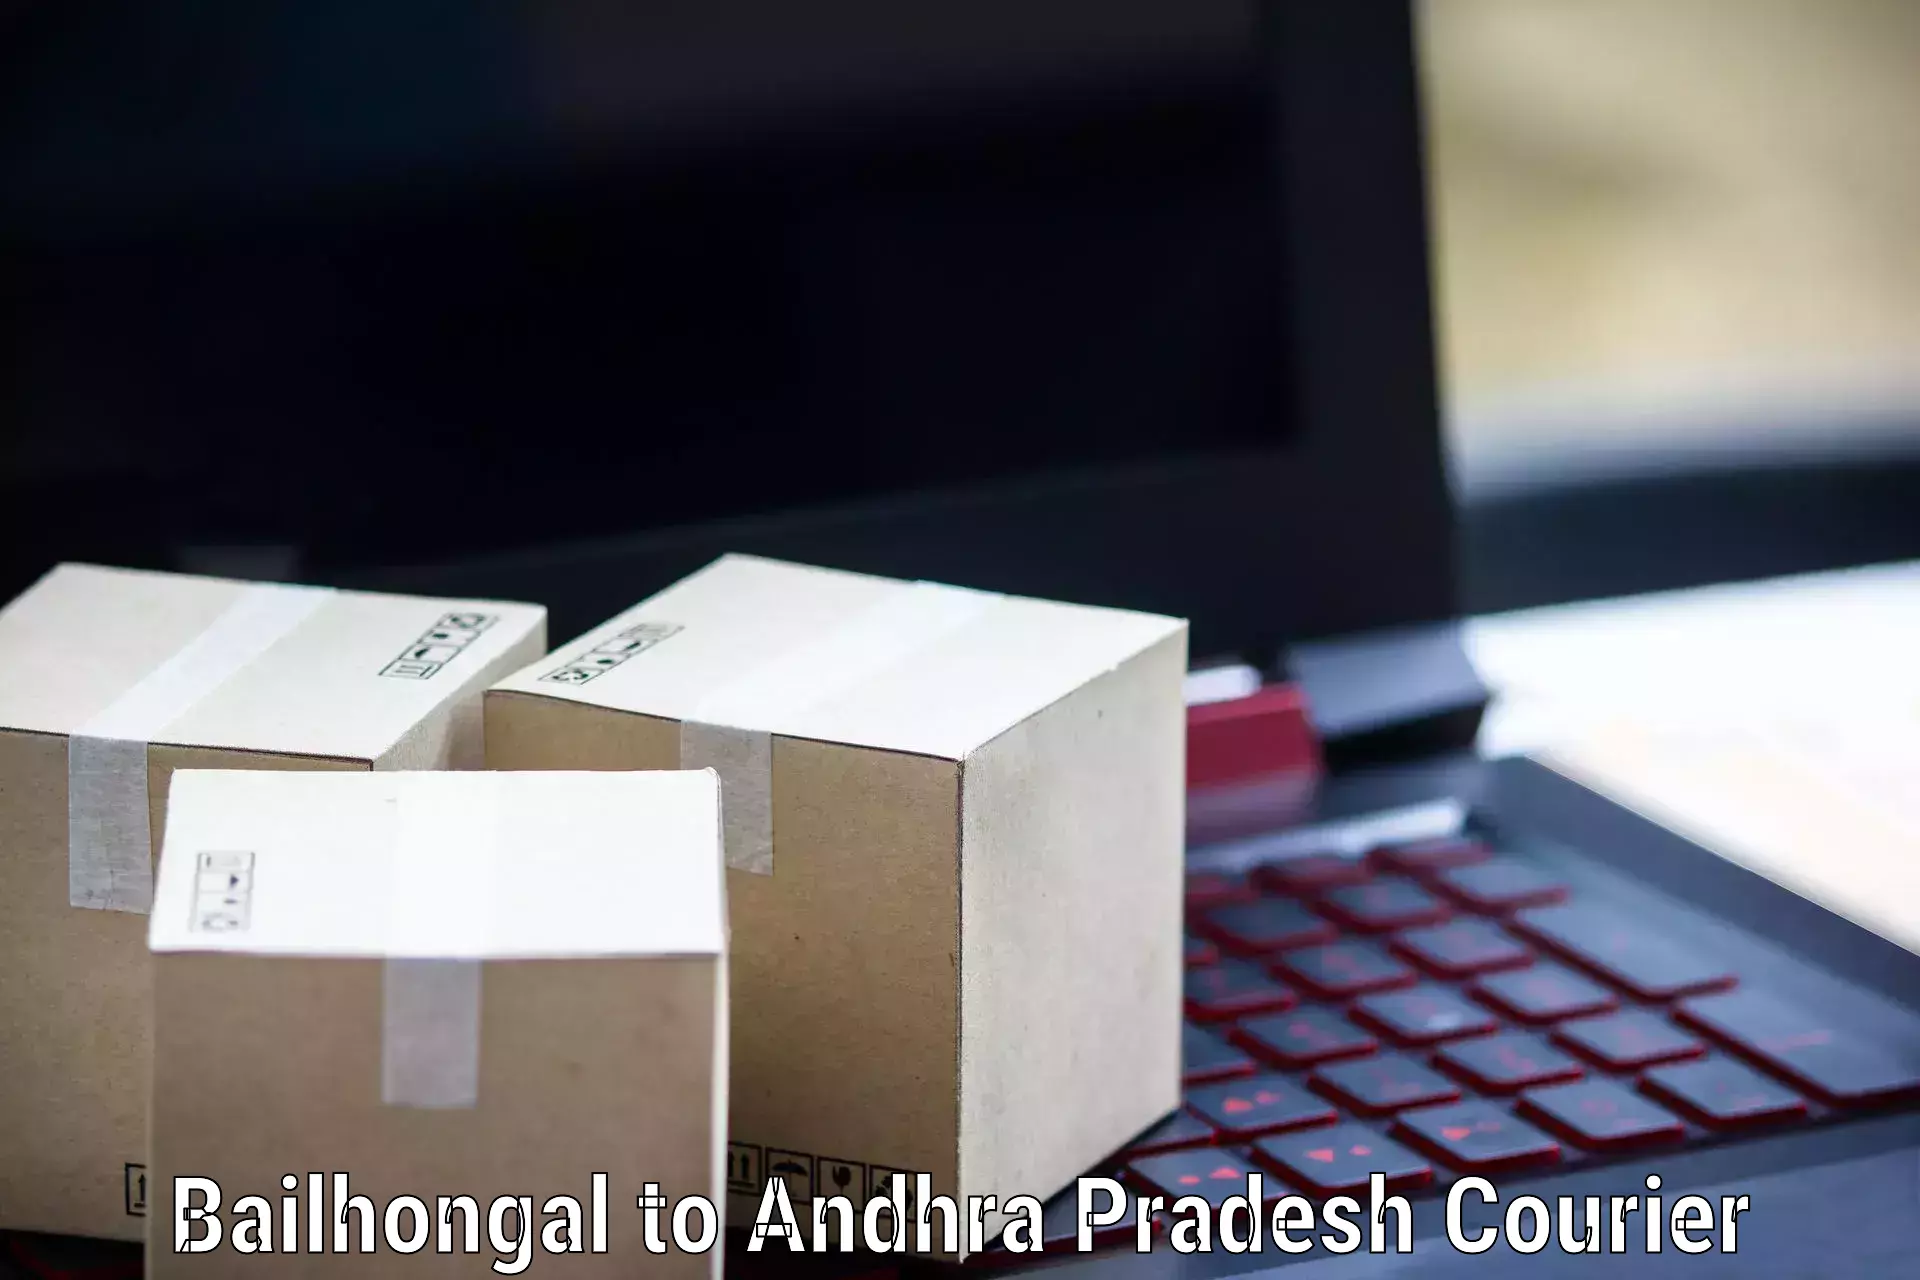 Package delivery network Bailhongal to Doranala